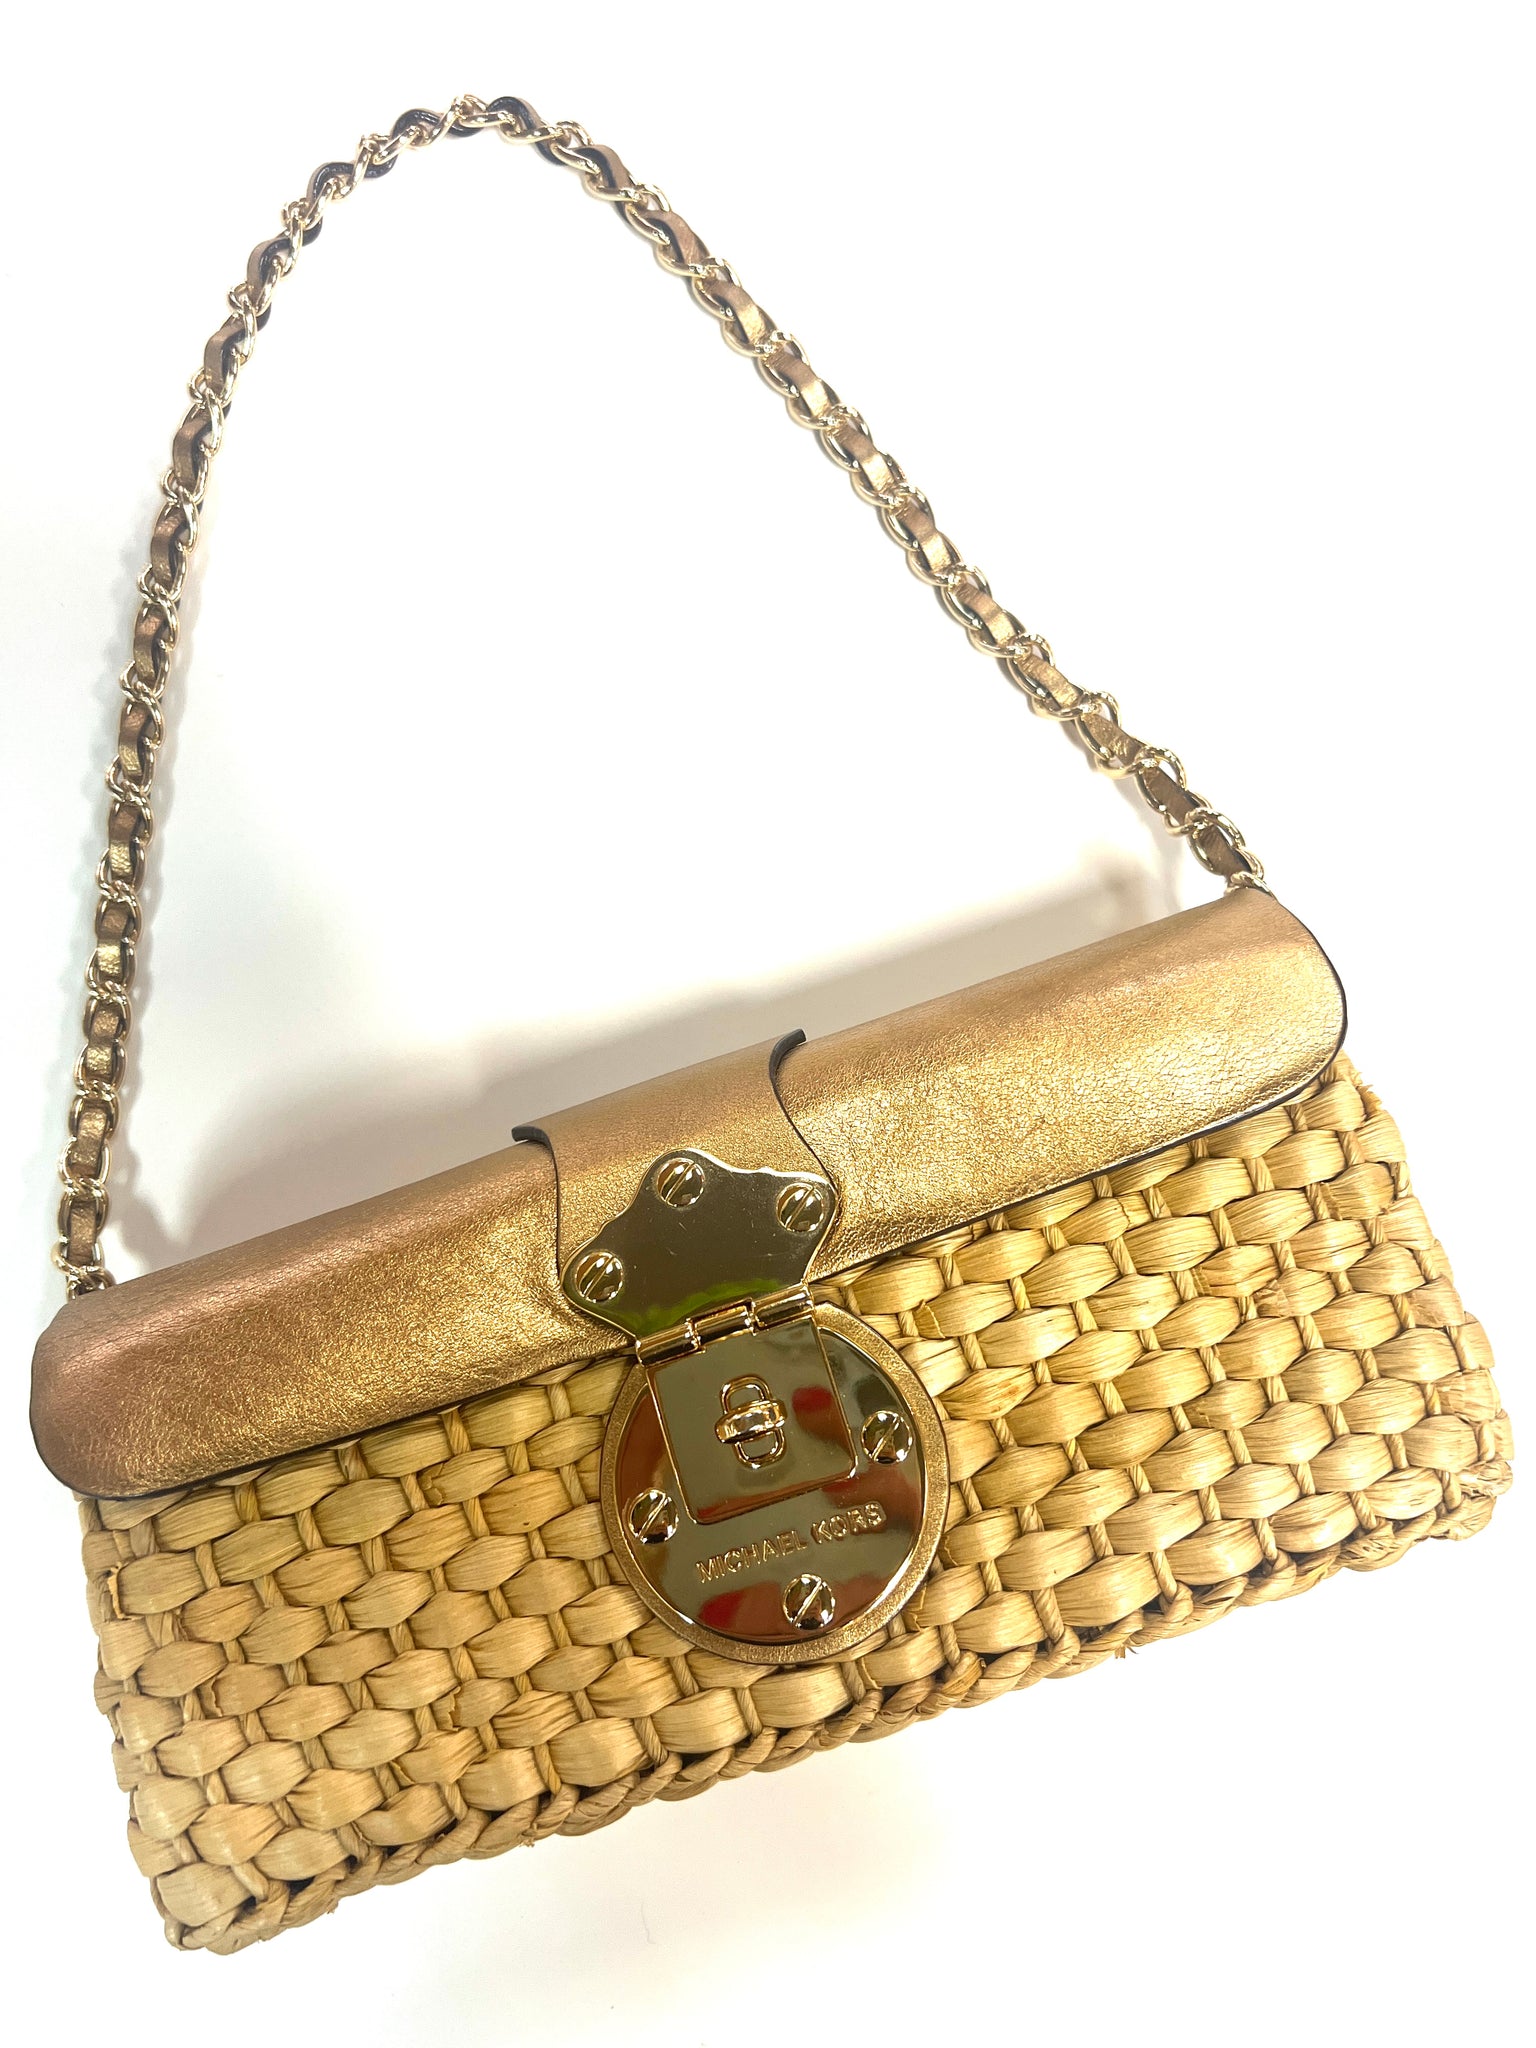 Authentic Michael Kors Gold Leather & Seagrass Purse/Clutch – Relics to  Rhinestones